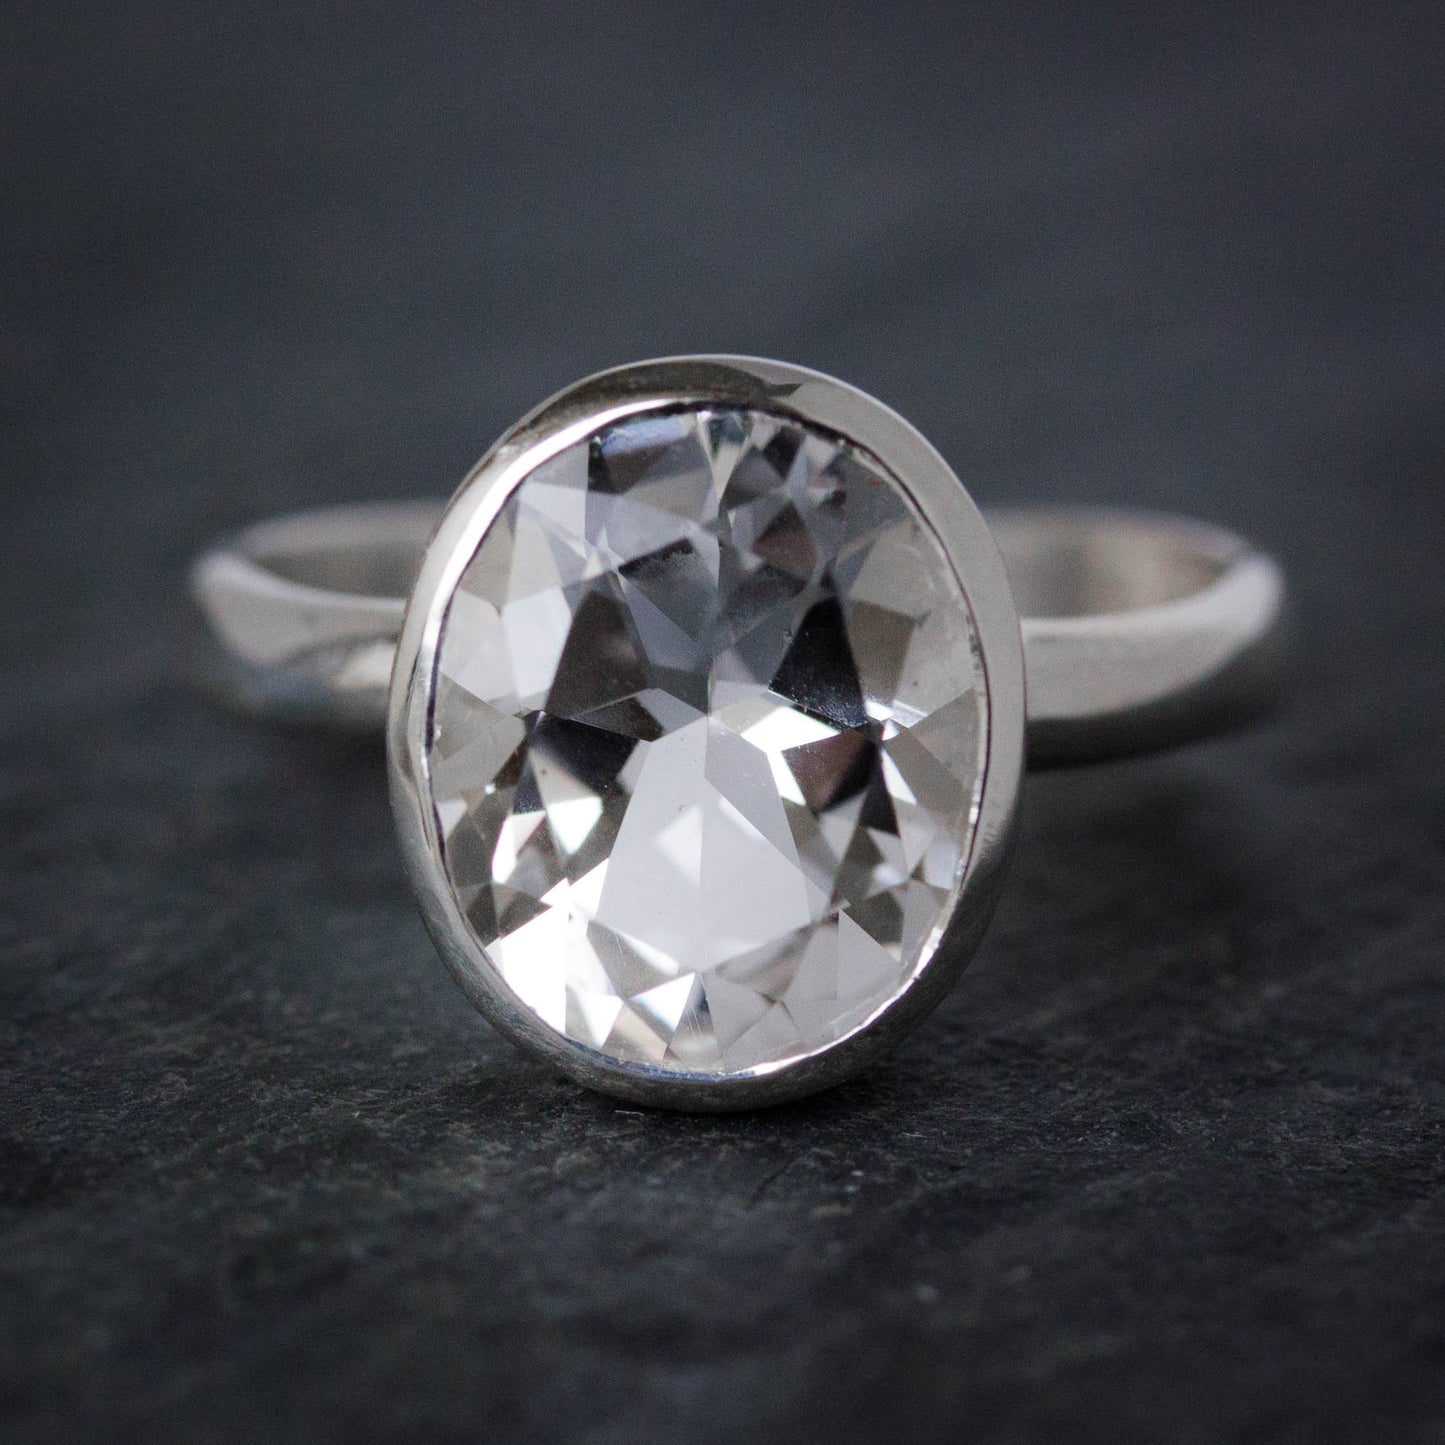 An eco-friendly Size 6.5 Handcrafted White Topaz ring, Oval Ring in Sterling Silver, Recycled Silver, with black surface showcasing the gemstone.